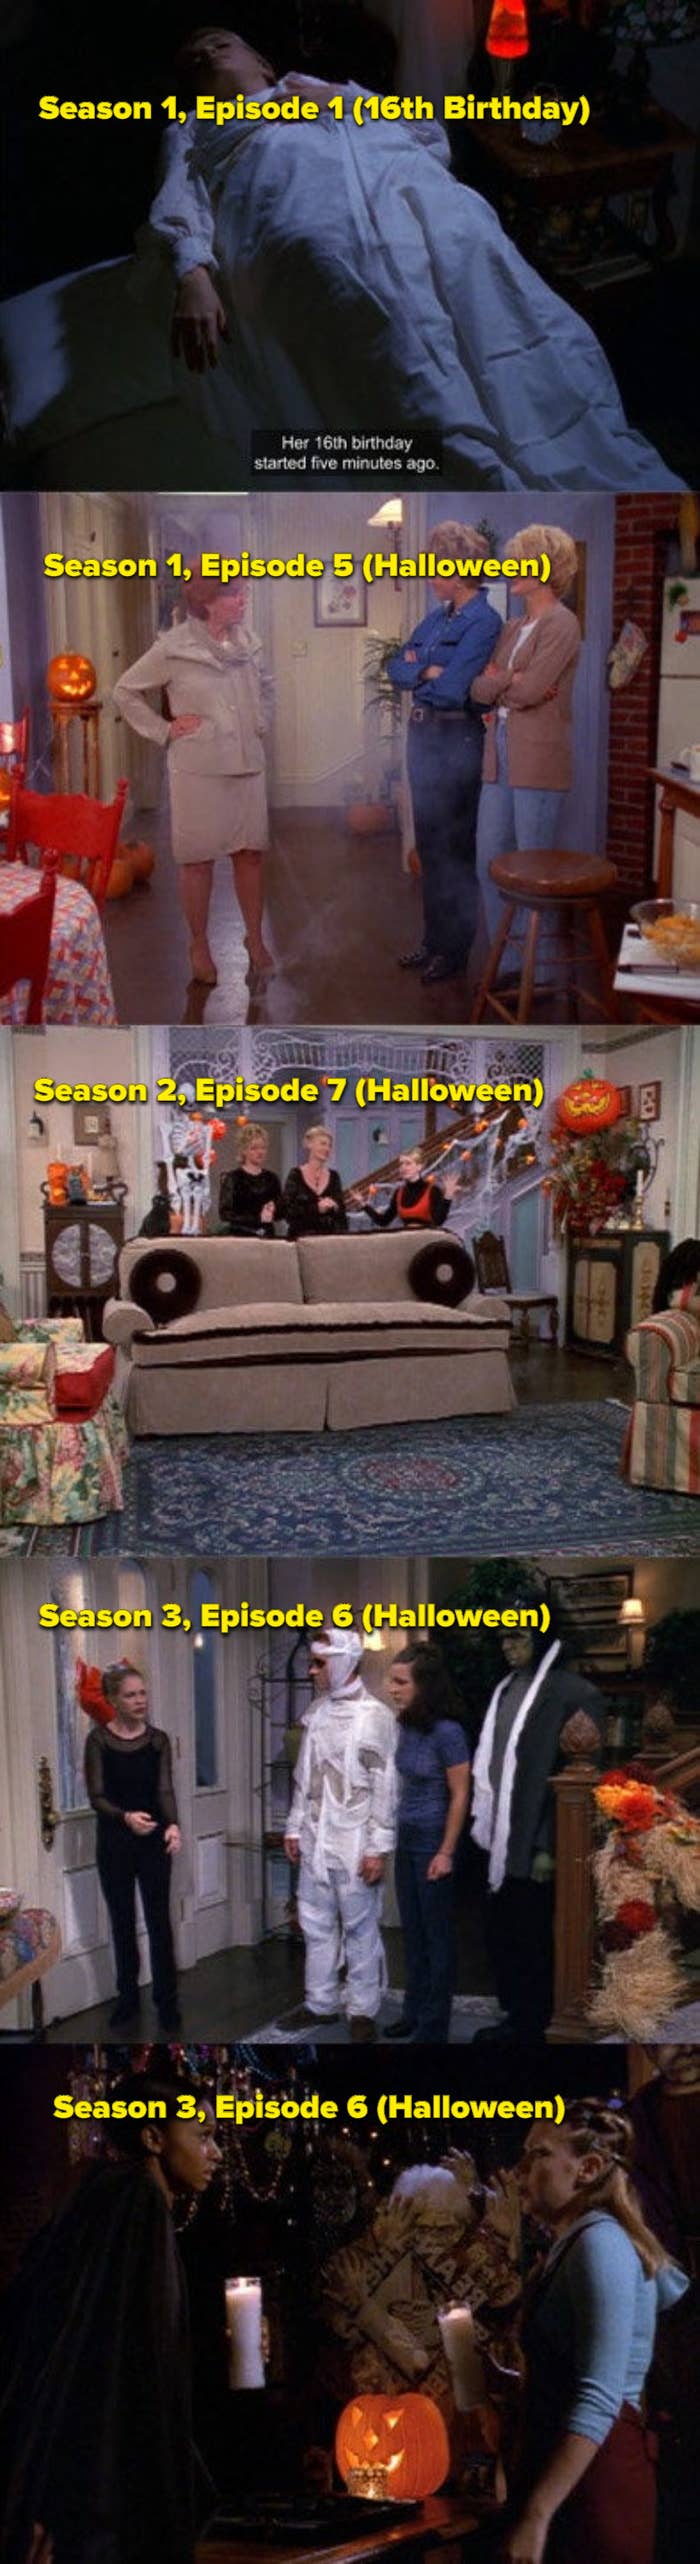 Pictures of halloween episodes from Seasons 1-4